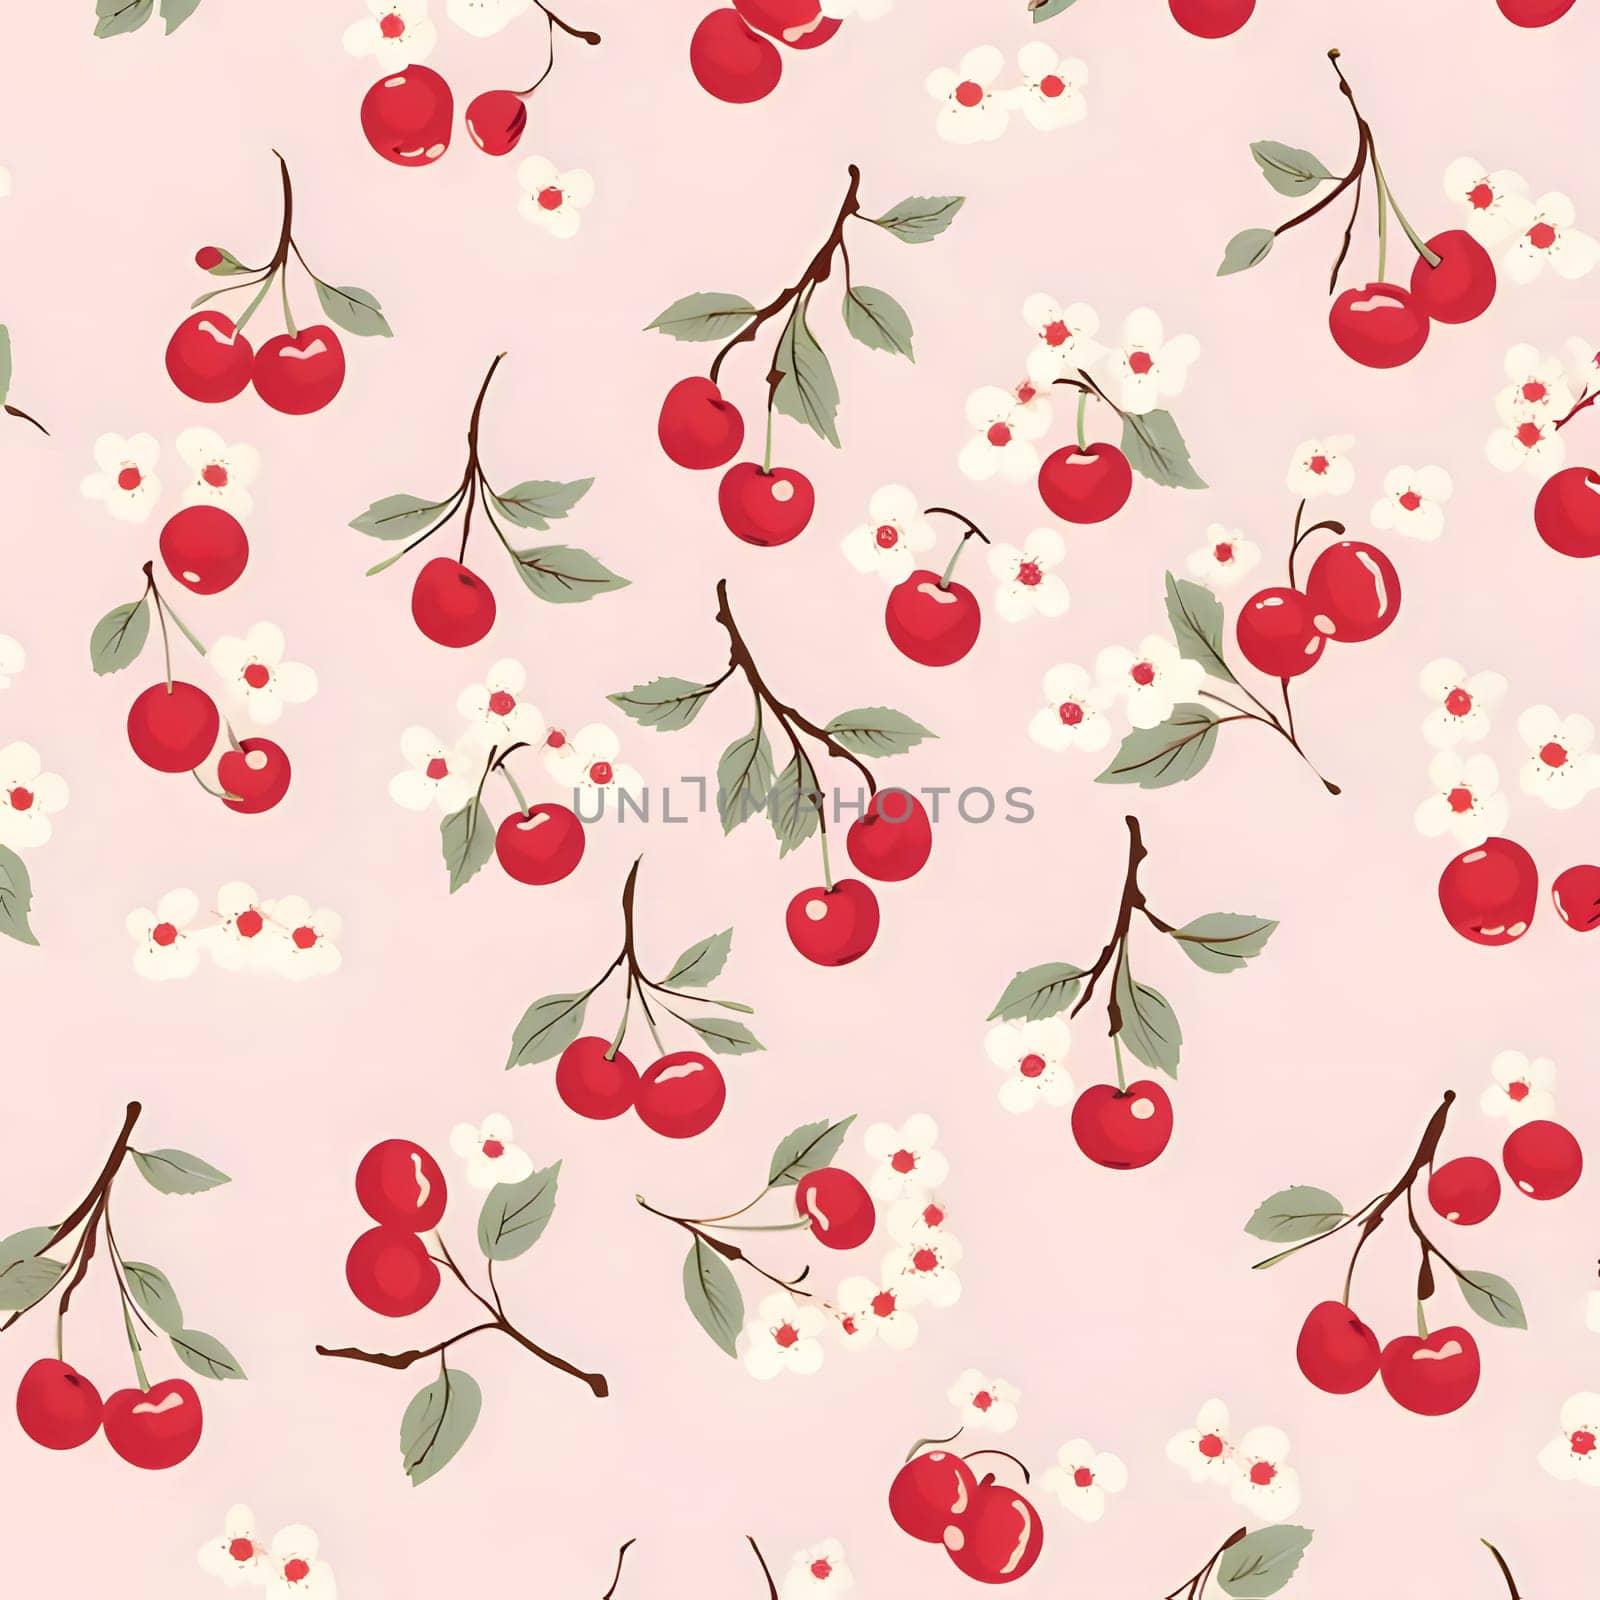 Patterns and banners backgrounds: Seamless pattern with cherries and flowers. Vector illustration.